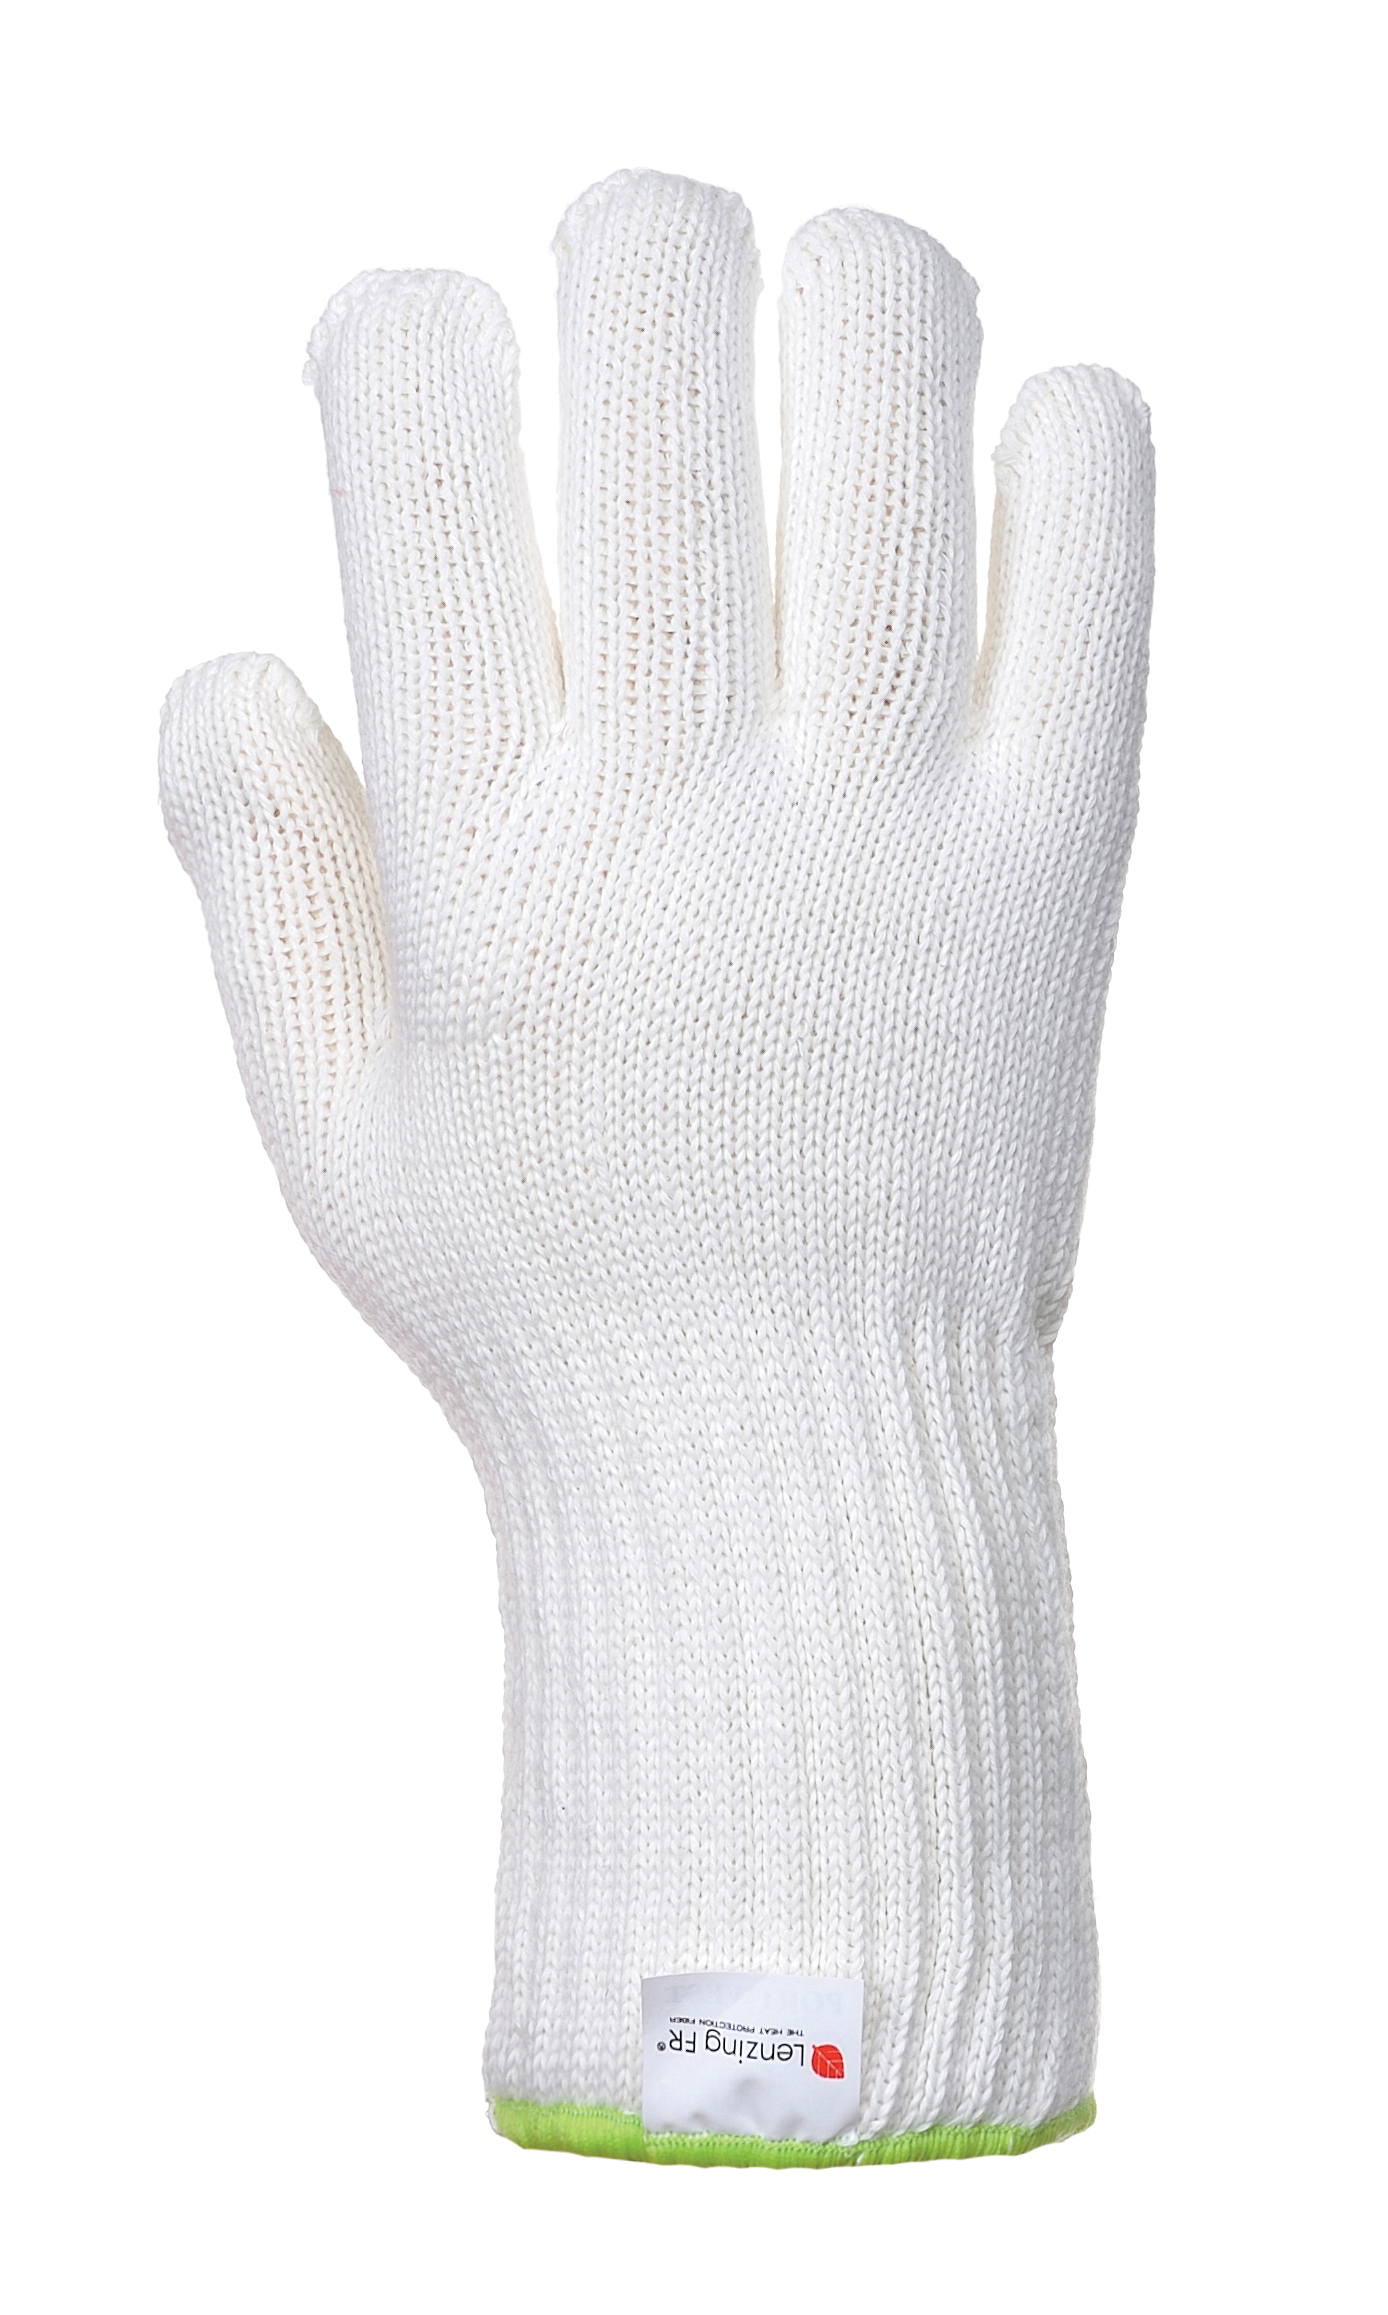 Portwest A590 Heat Resistant 250 Glove (This glove is sold as a single unit only, not as a pair)-0